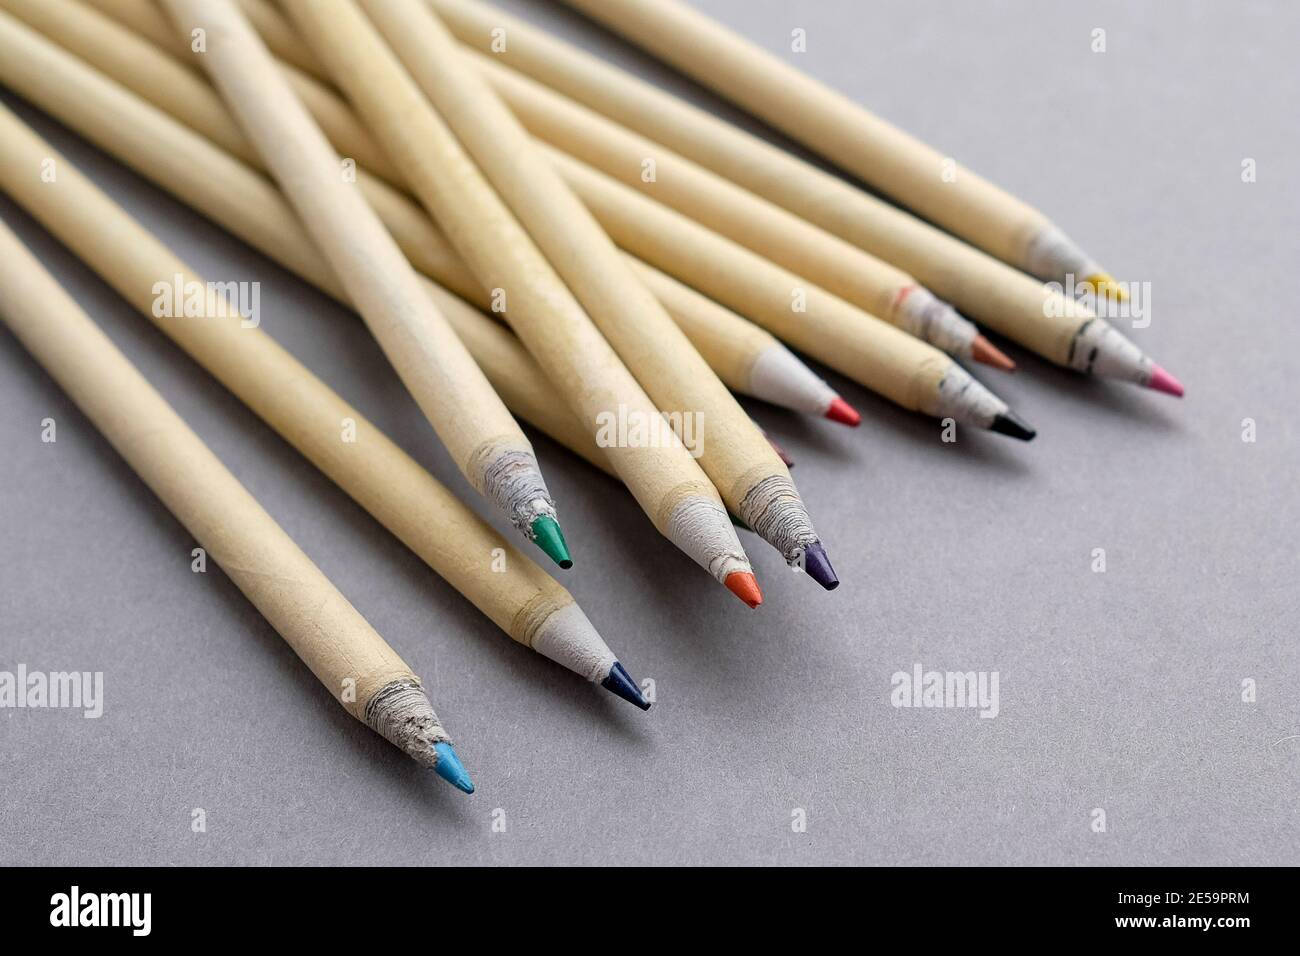 Eco-friendly pencils. Colored pencils for drawing. Grey background. Stock Photo